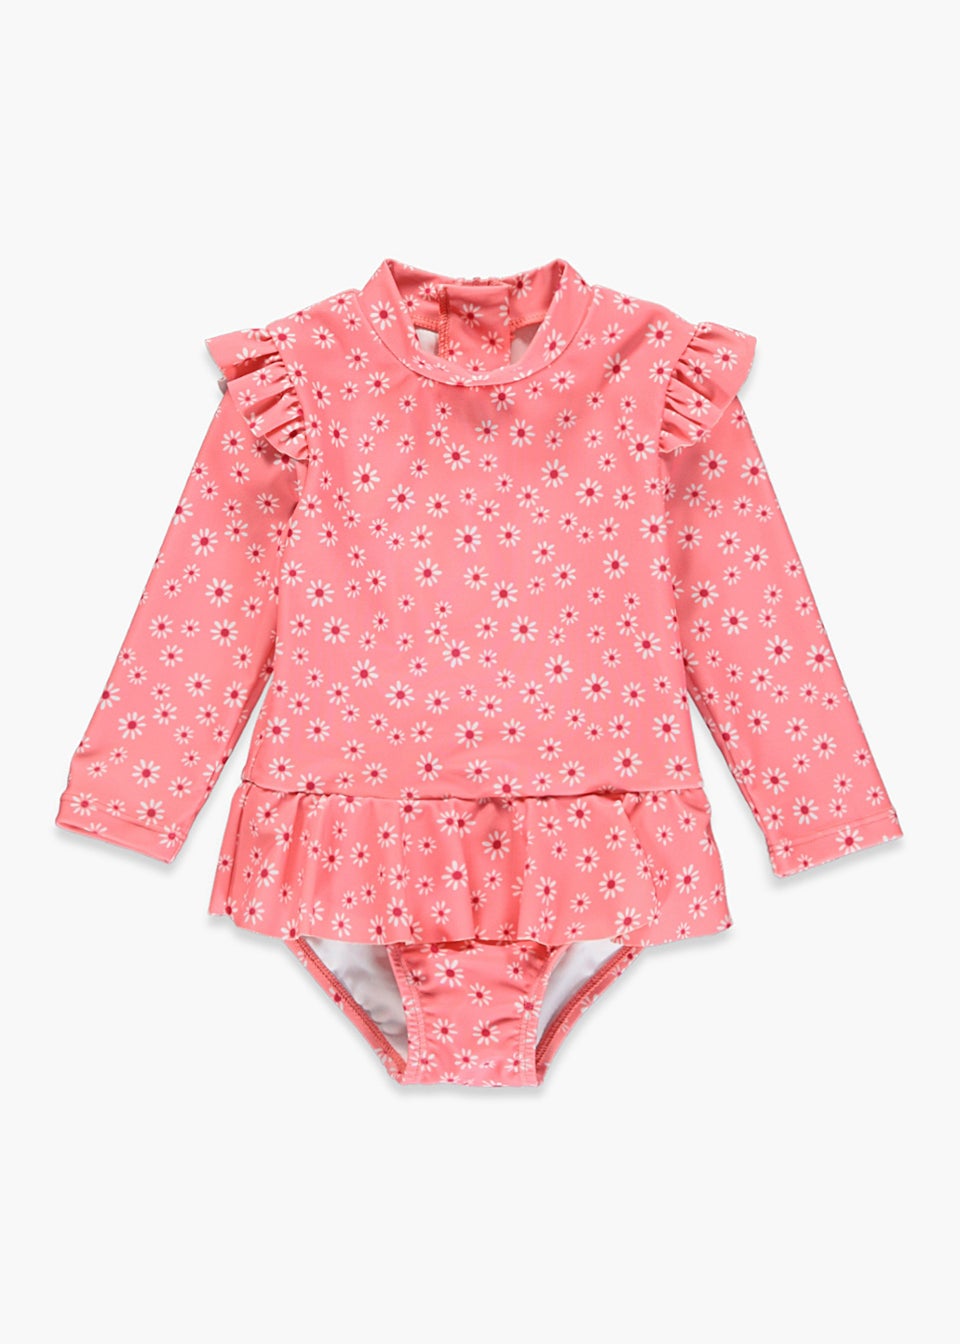 Girls Pink Floral Frill Long Sleeve Swimming Costume (3mths-6yrs)